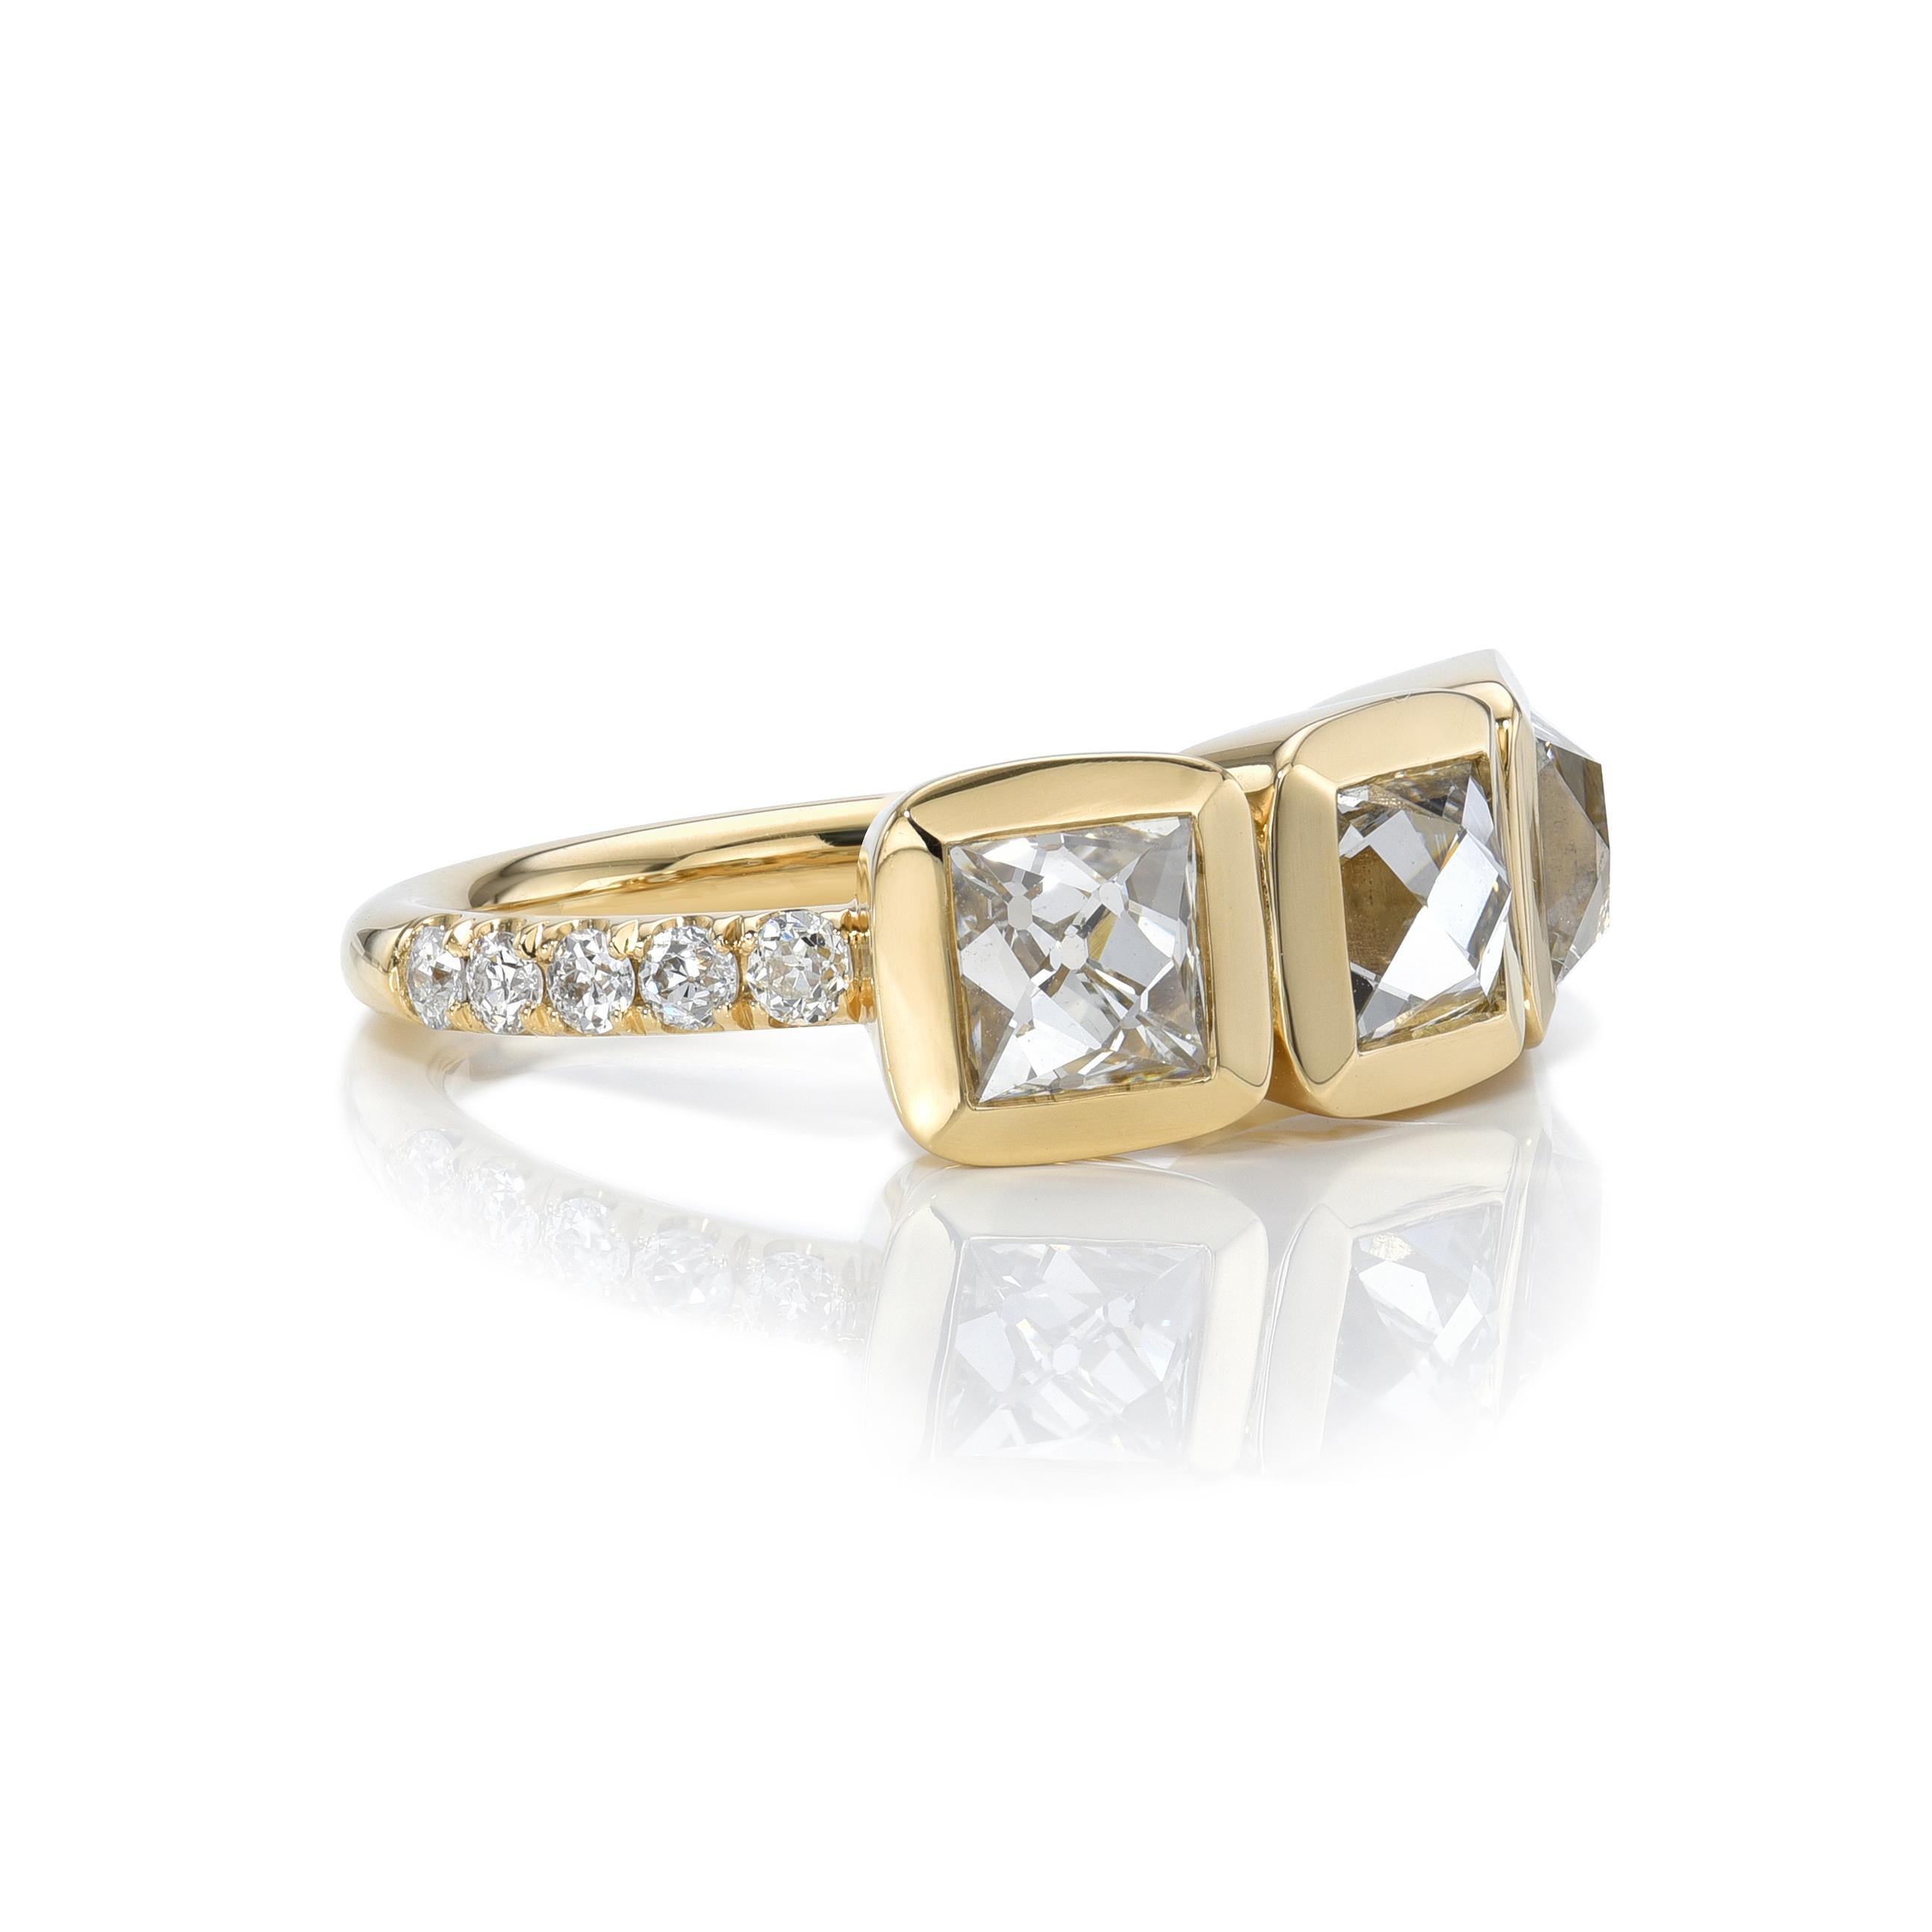 2.76ctw F-G/VS2-SI1 GIA certified French cut diamonds with 0.31ctw old European cut accent diamonds set in a handcrafted 18K yellow gold mounting.